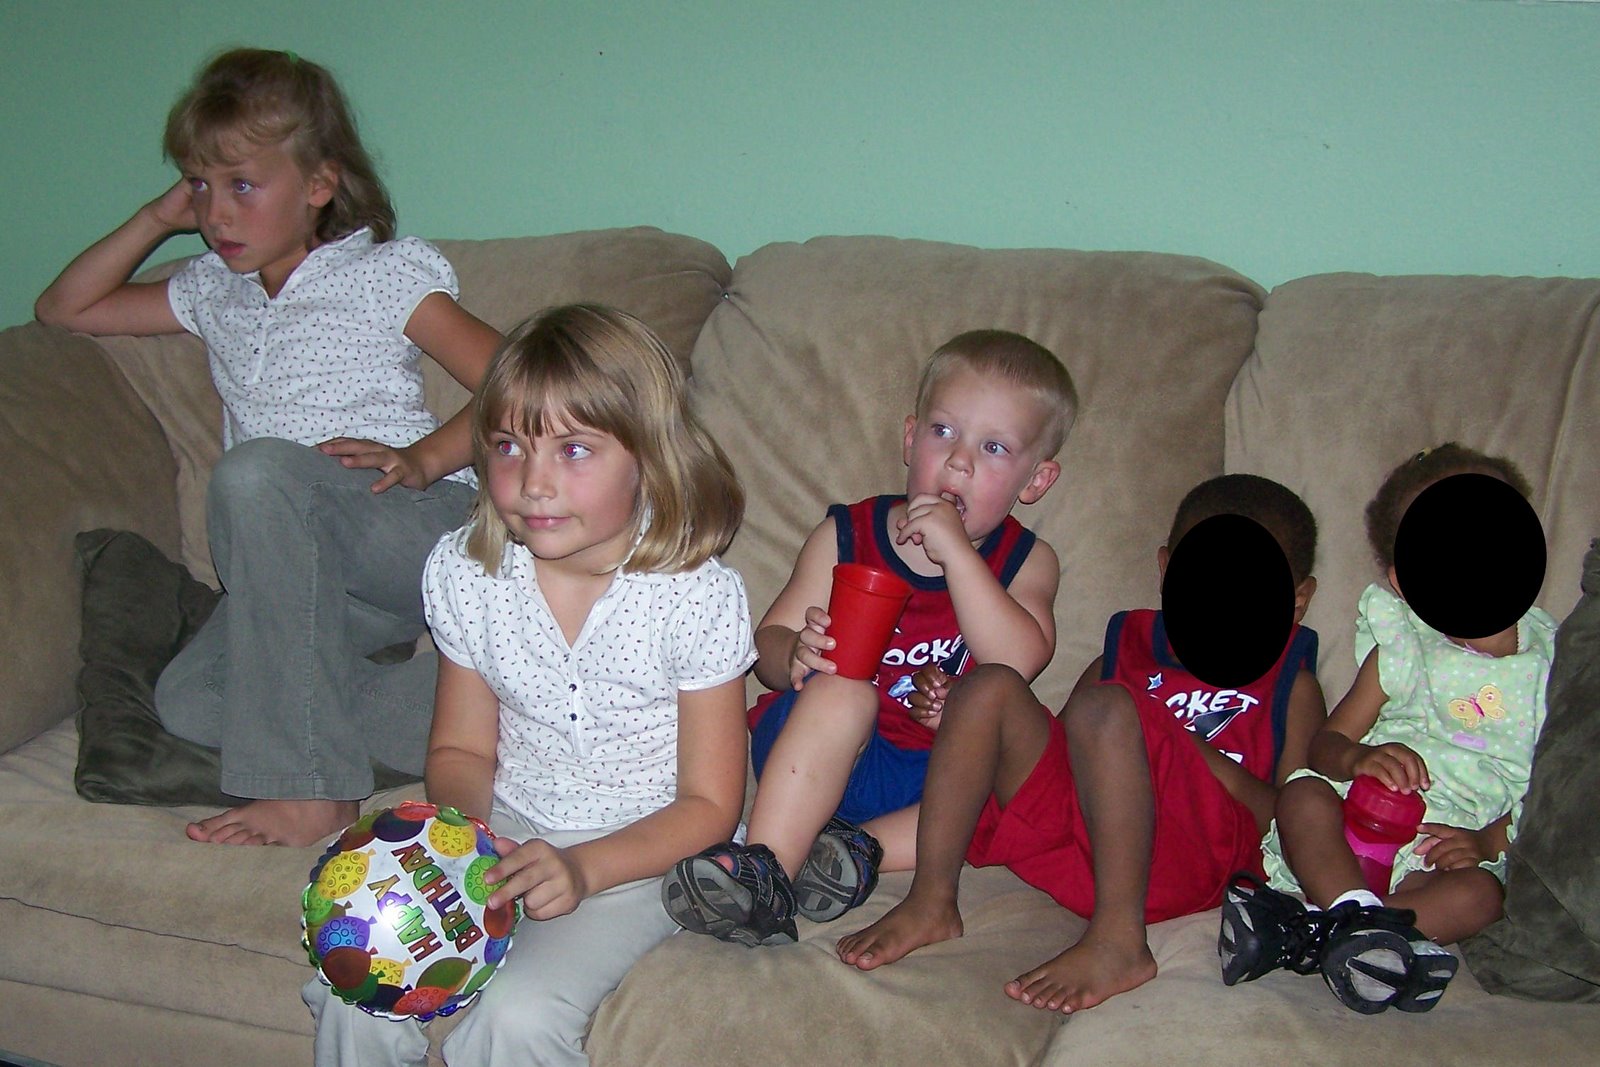 [5+Kids+on+a+Couch+KG3D+blurred.jpg]